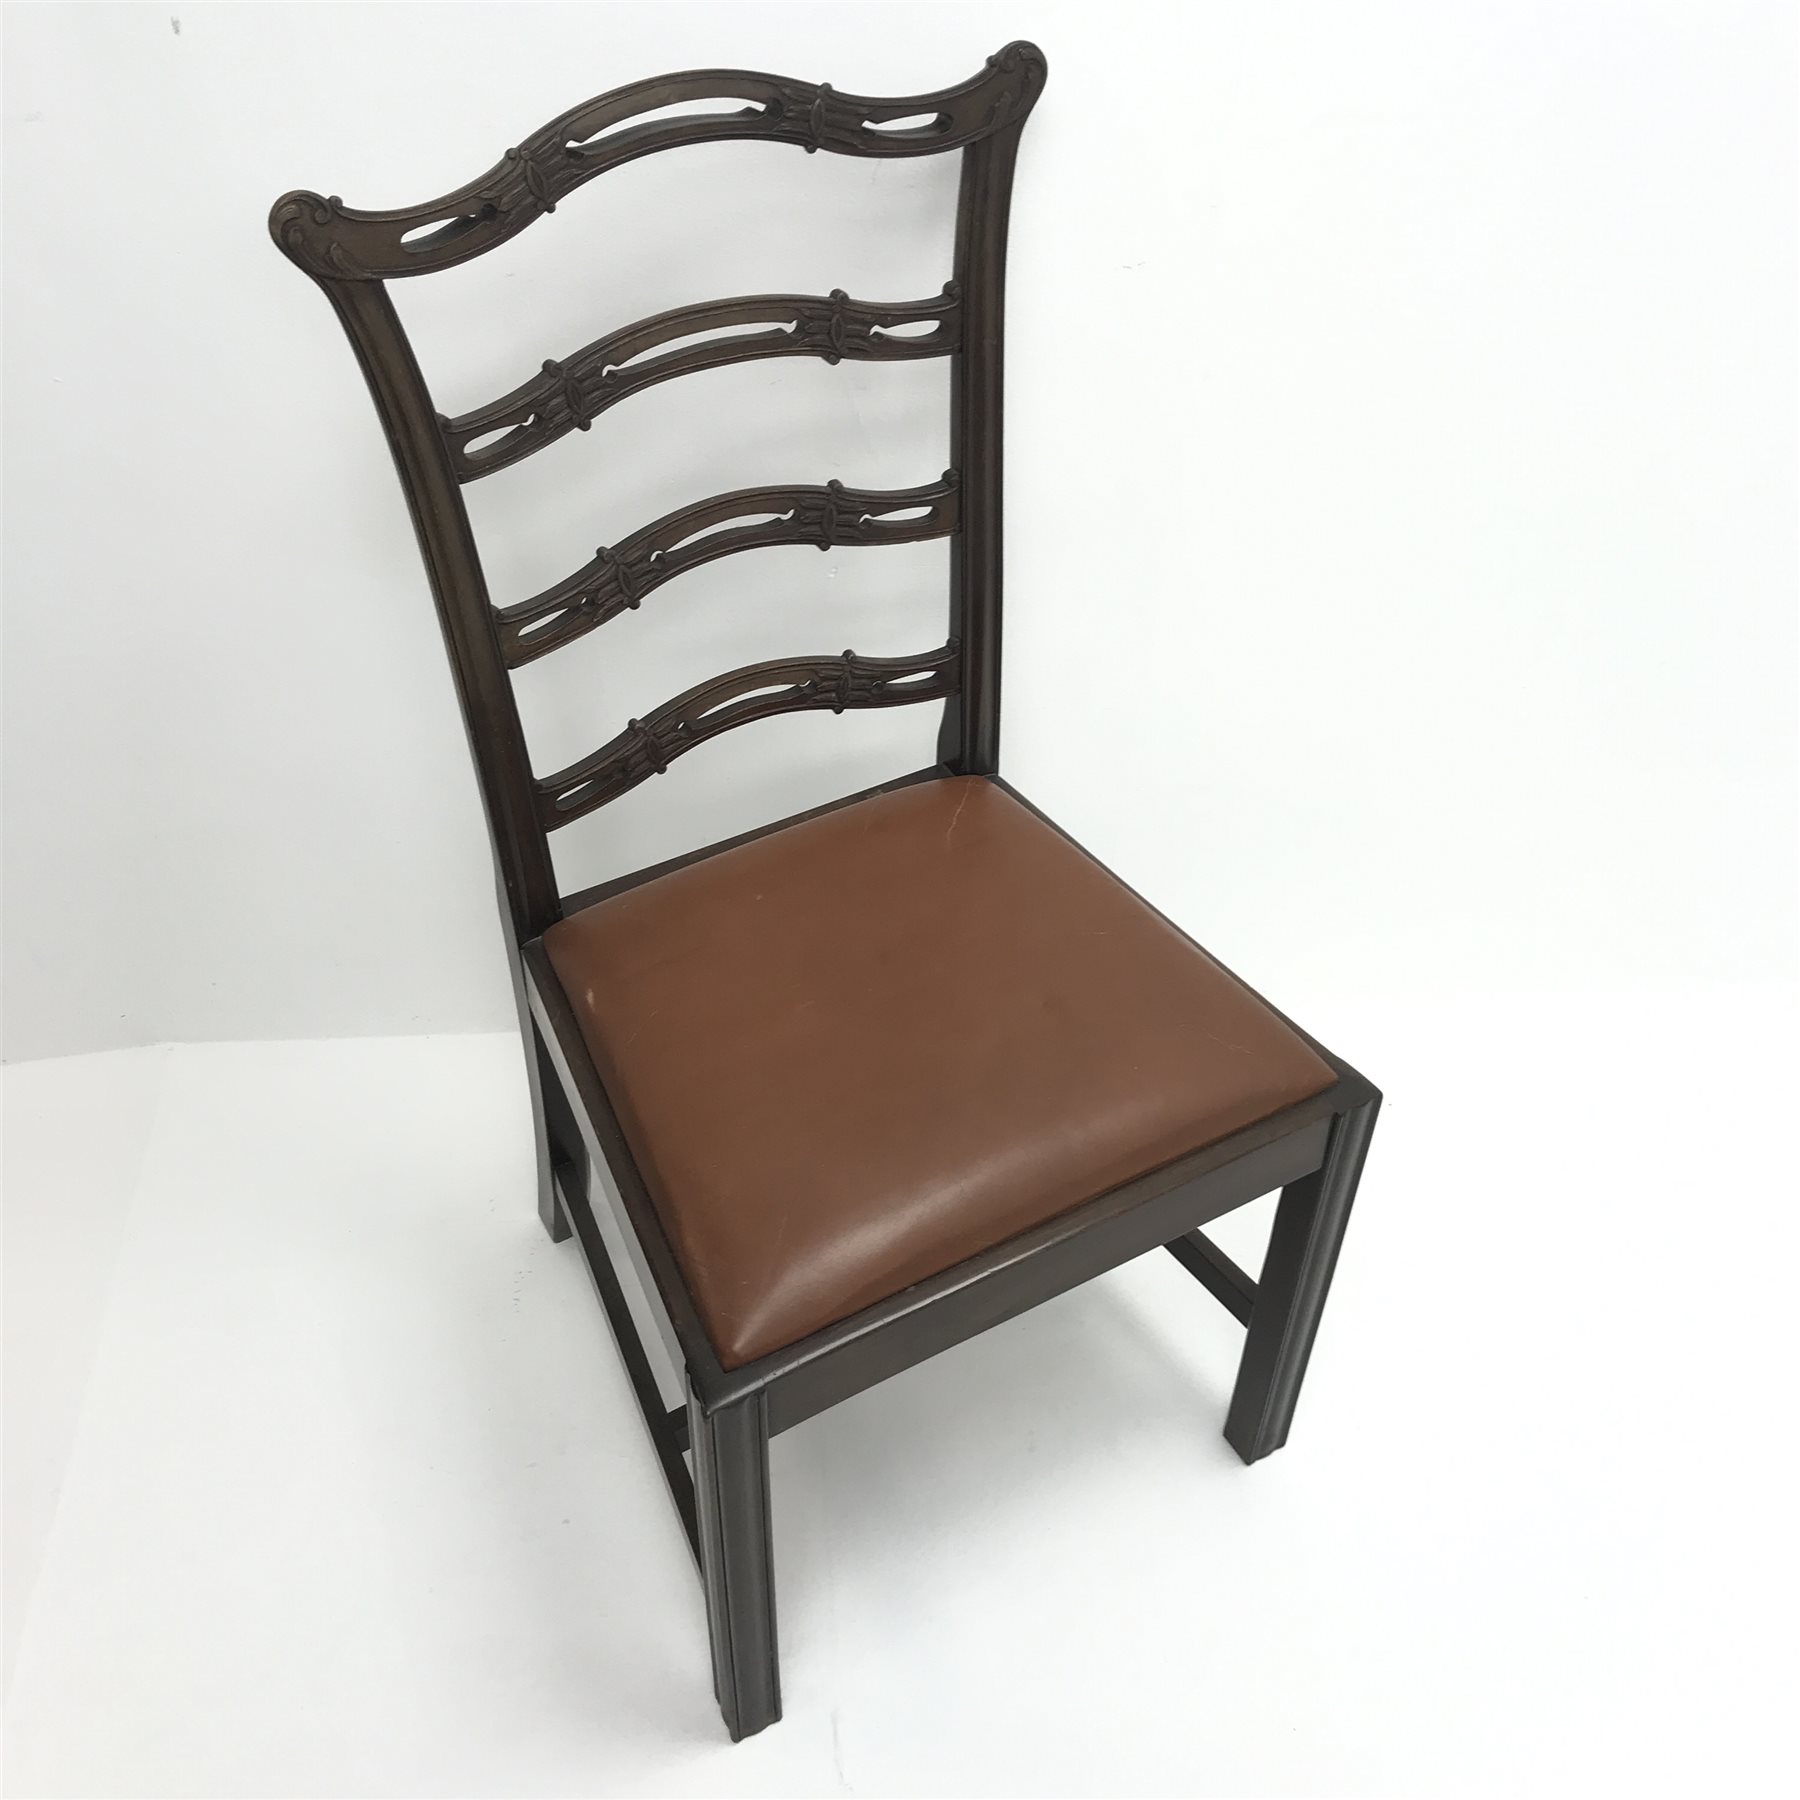 19th century mahogany Chippendale style waved ladder back chair, upholstered seat, square supports, - Image 2 of 2